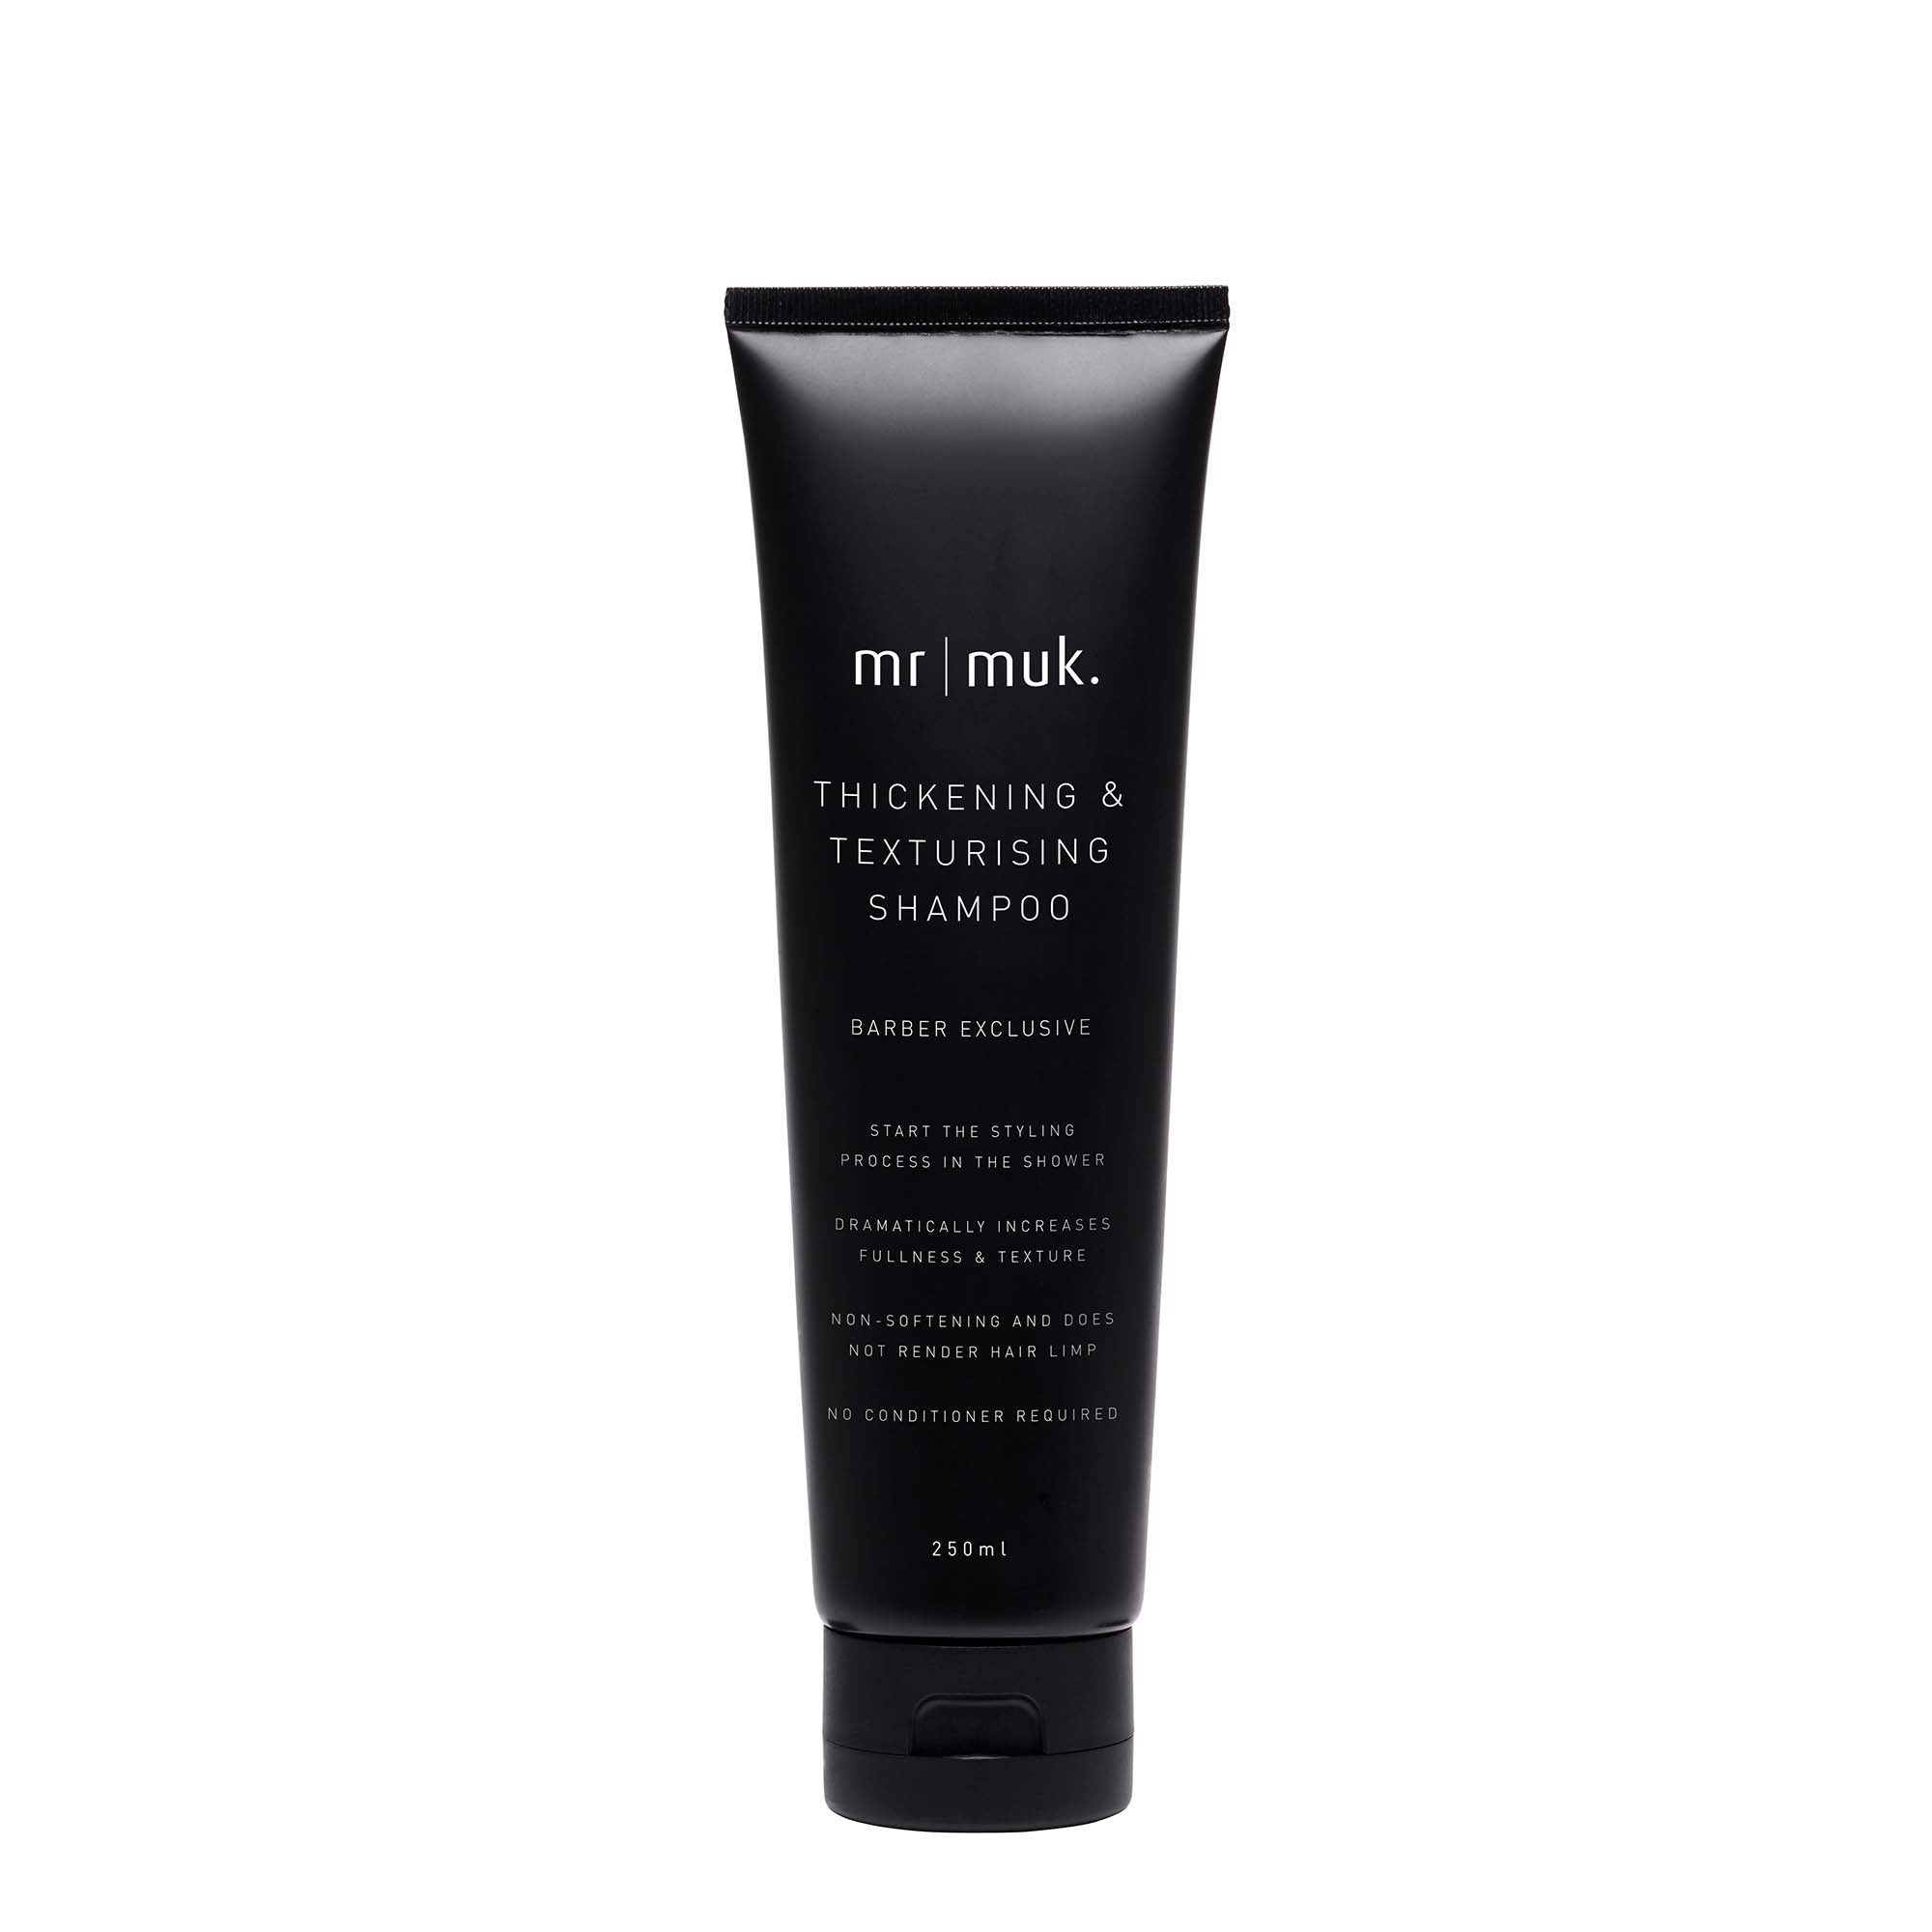 Muk Thinkening & Texturing Shampoo is a texturising shampoo that builds volume in the shower, leaving your hair full and lushly textured.